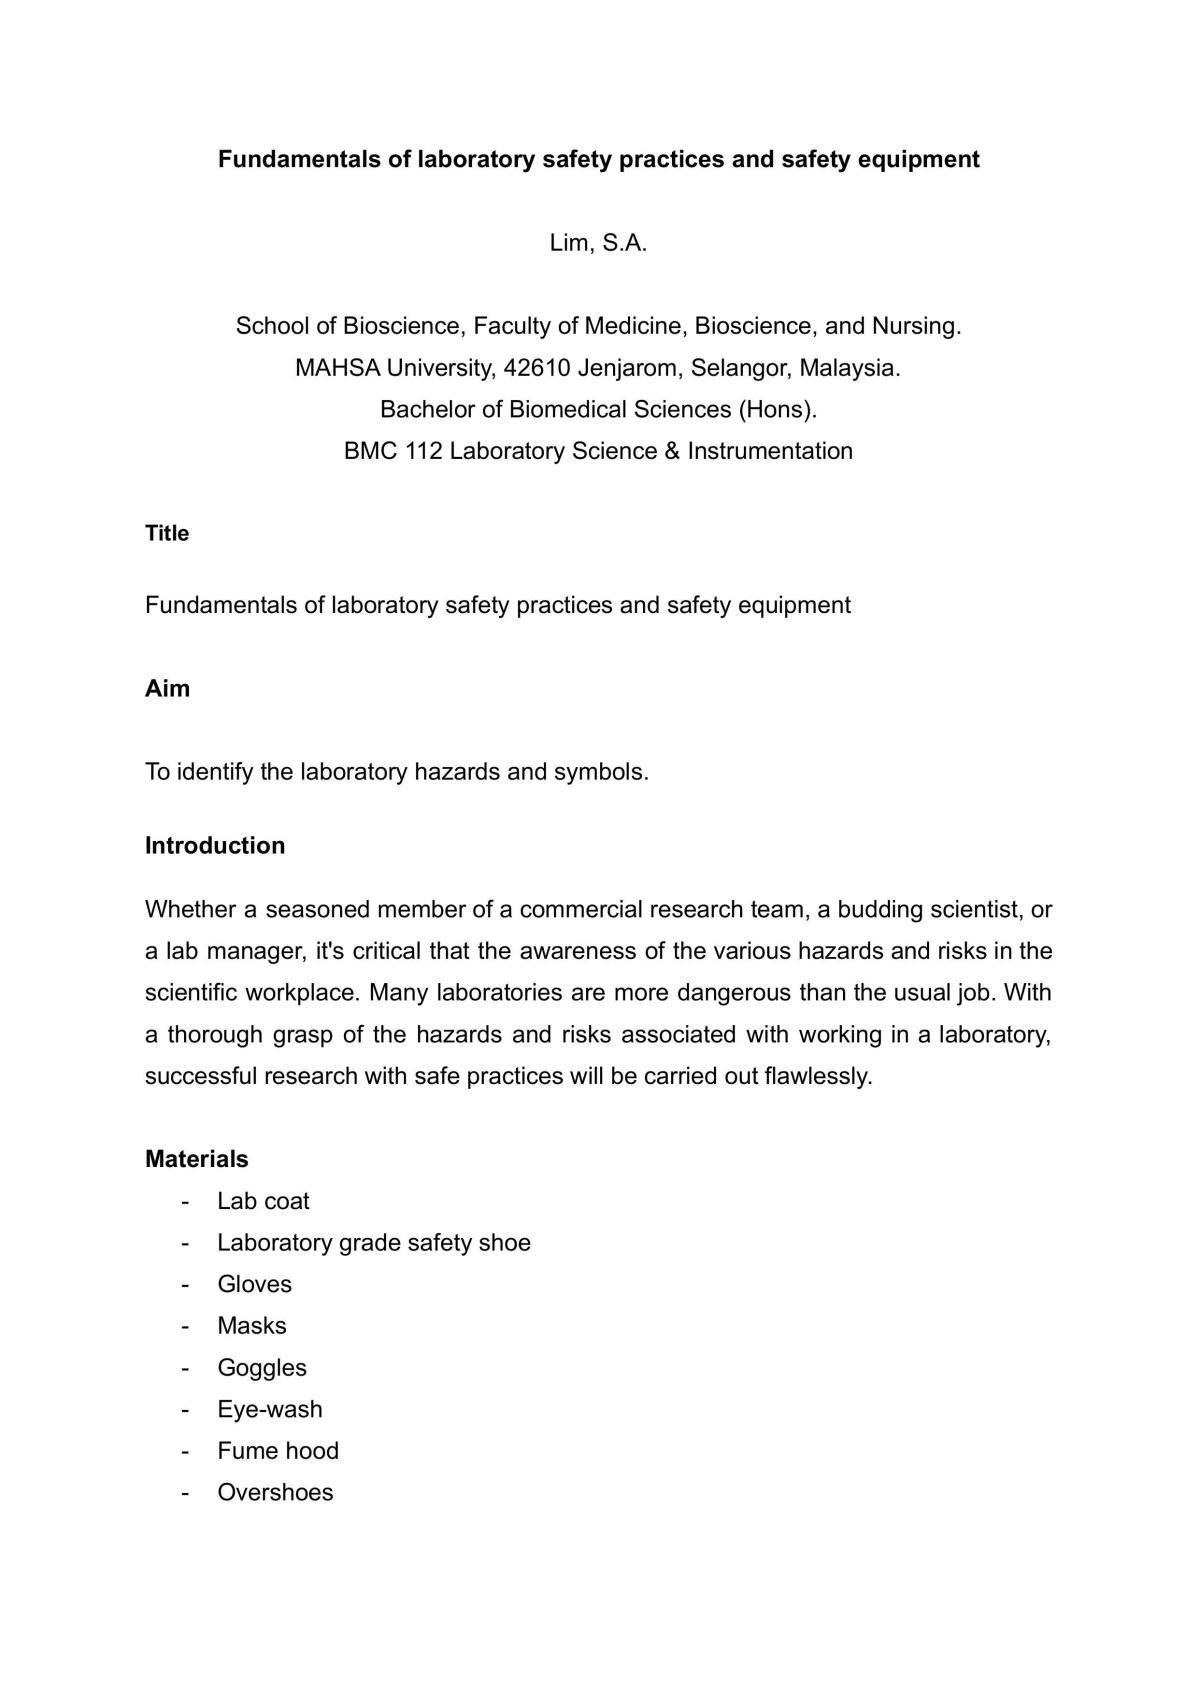 literature review on laboratory safety